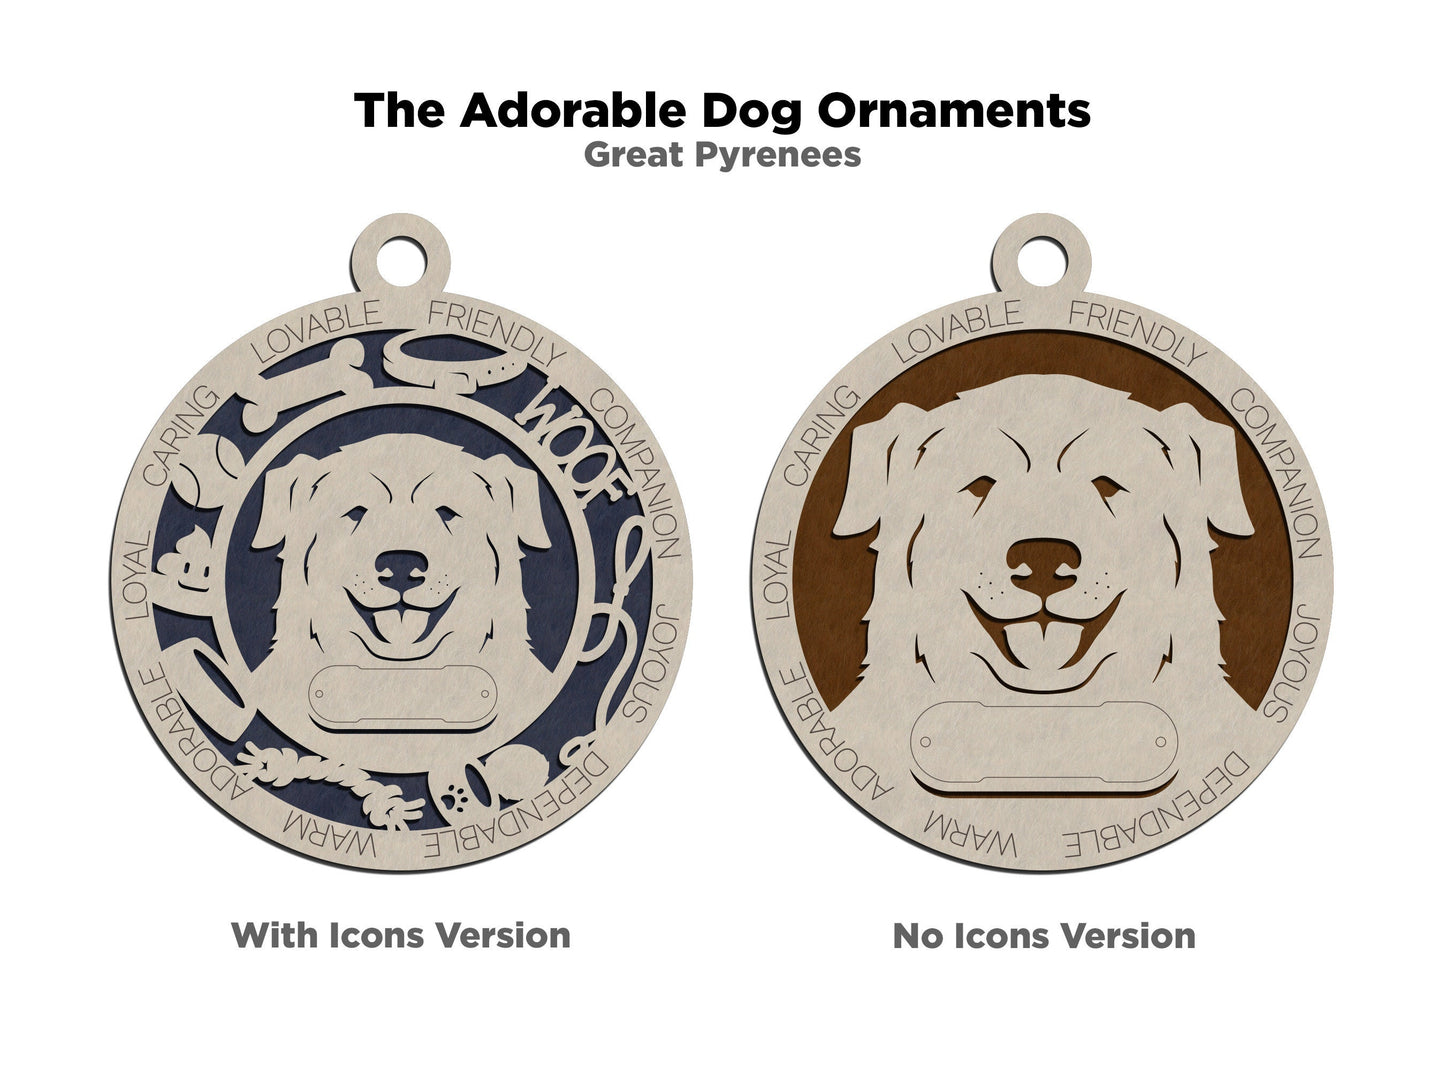 Great Pyrenees - Adorable Dog Ornaments - 2 Ornaments included - SVG, PDF, AI File Download - Sized for Glowforge